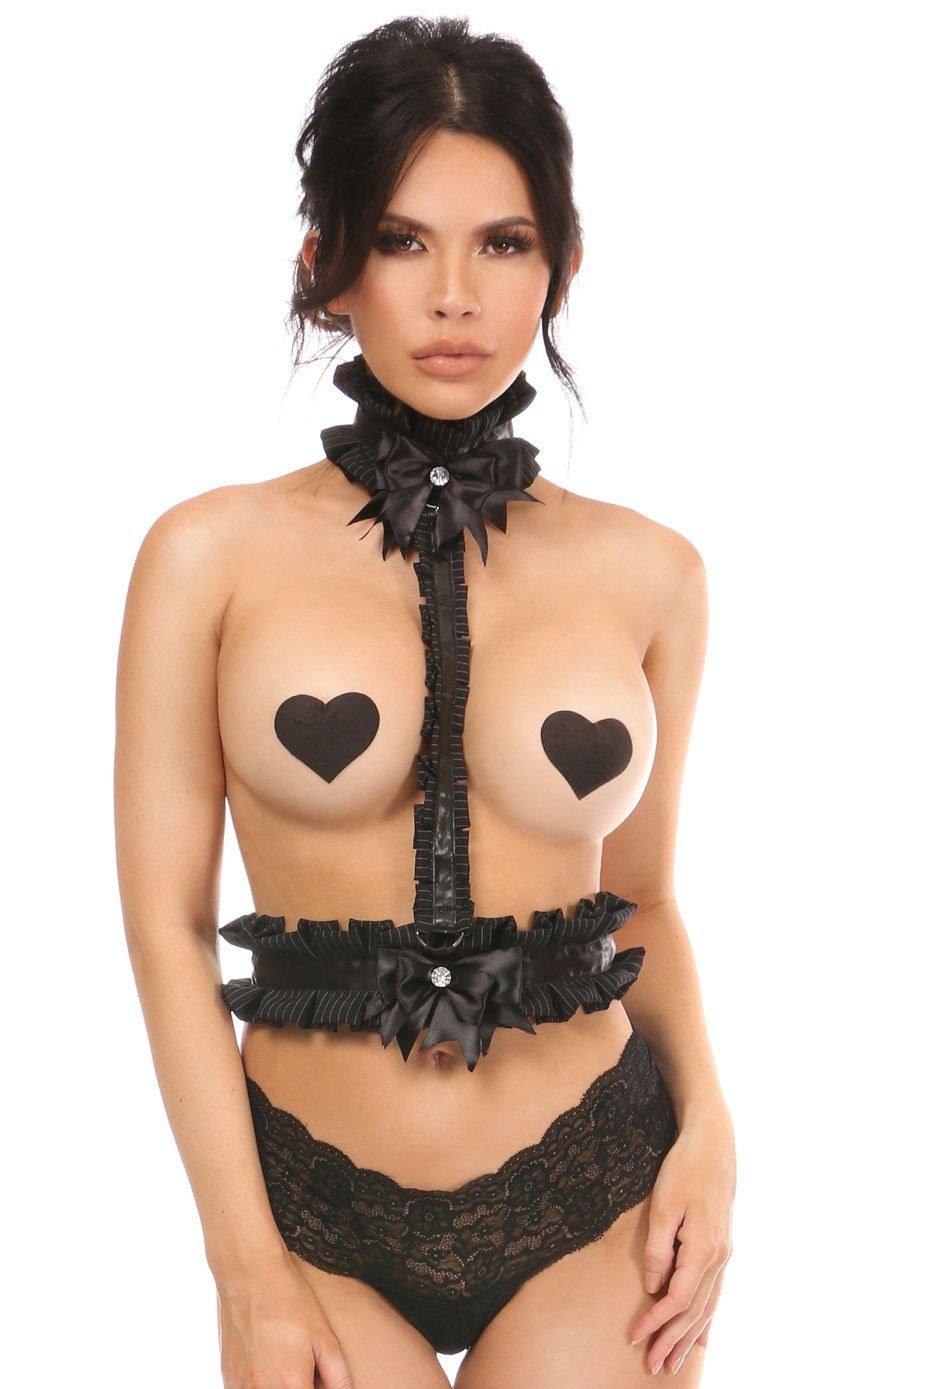 Pinstripe Single Strap Body Harness-Wings + Harness-Daisy Corsets-Black-O/S-SEXYSHOES.COM